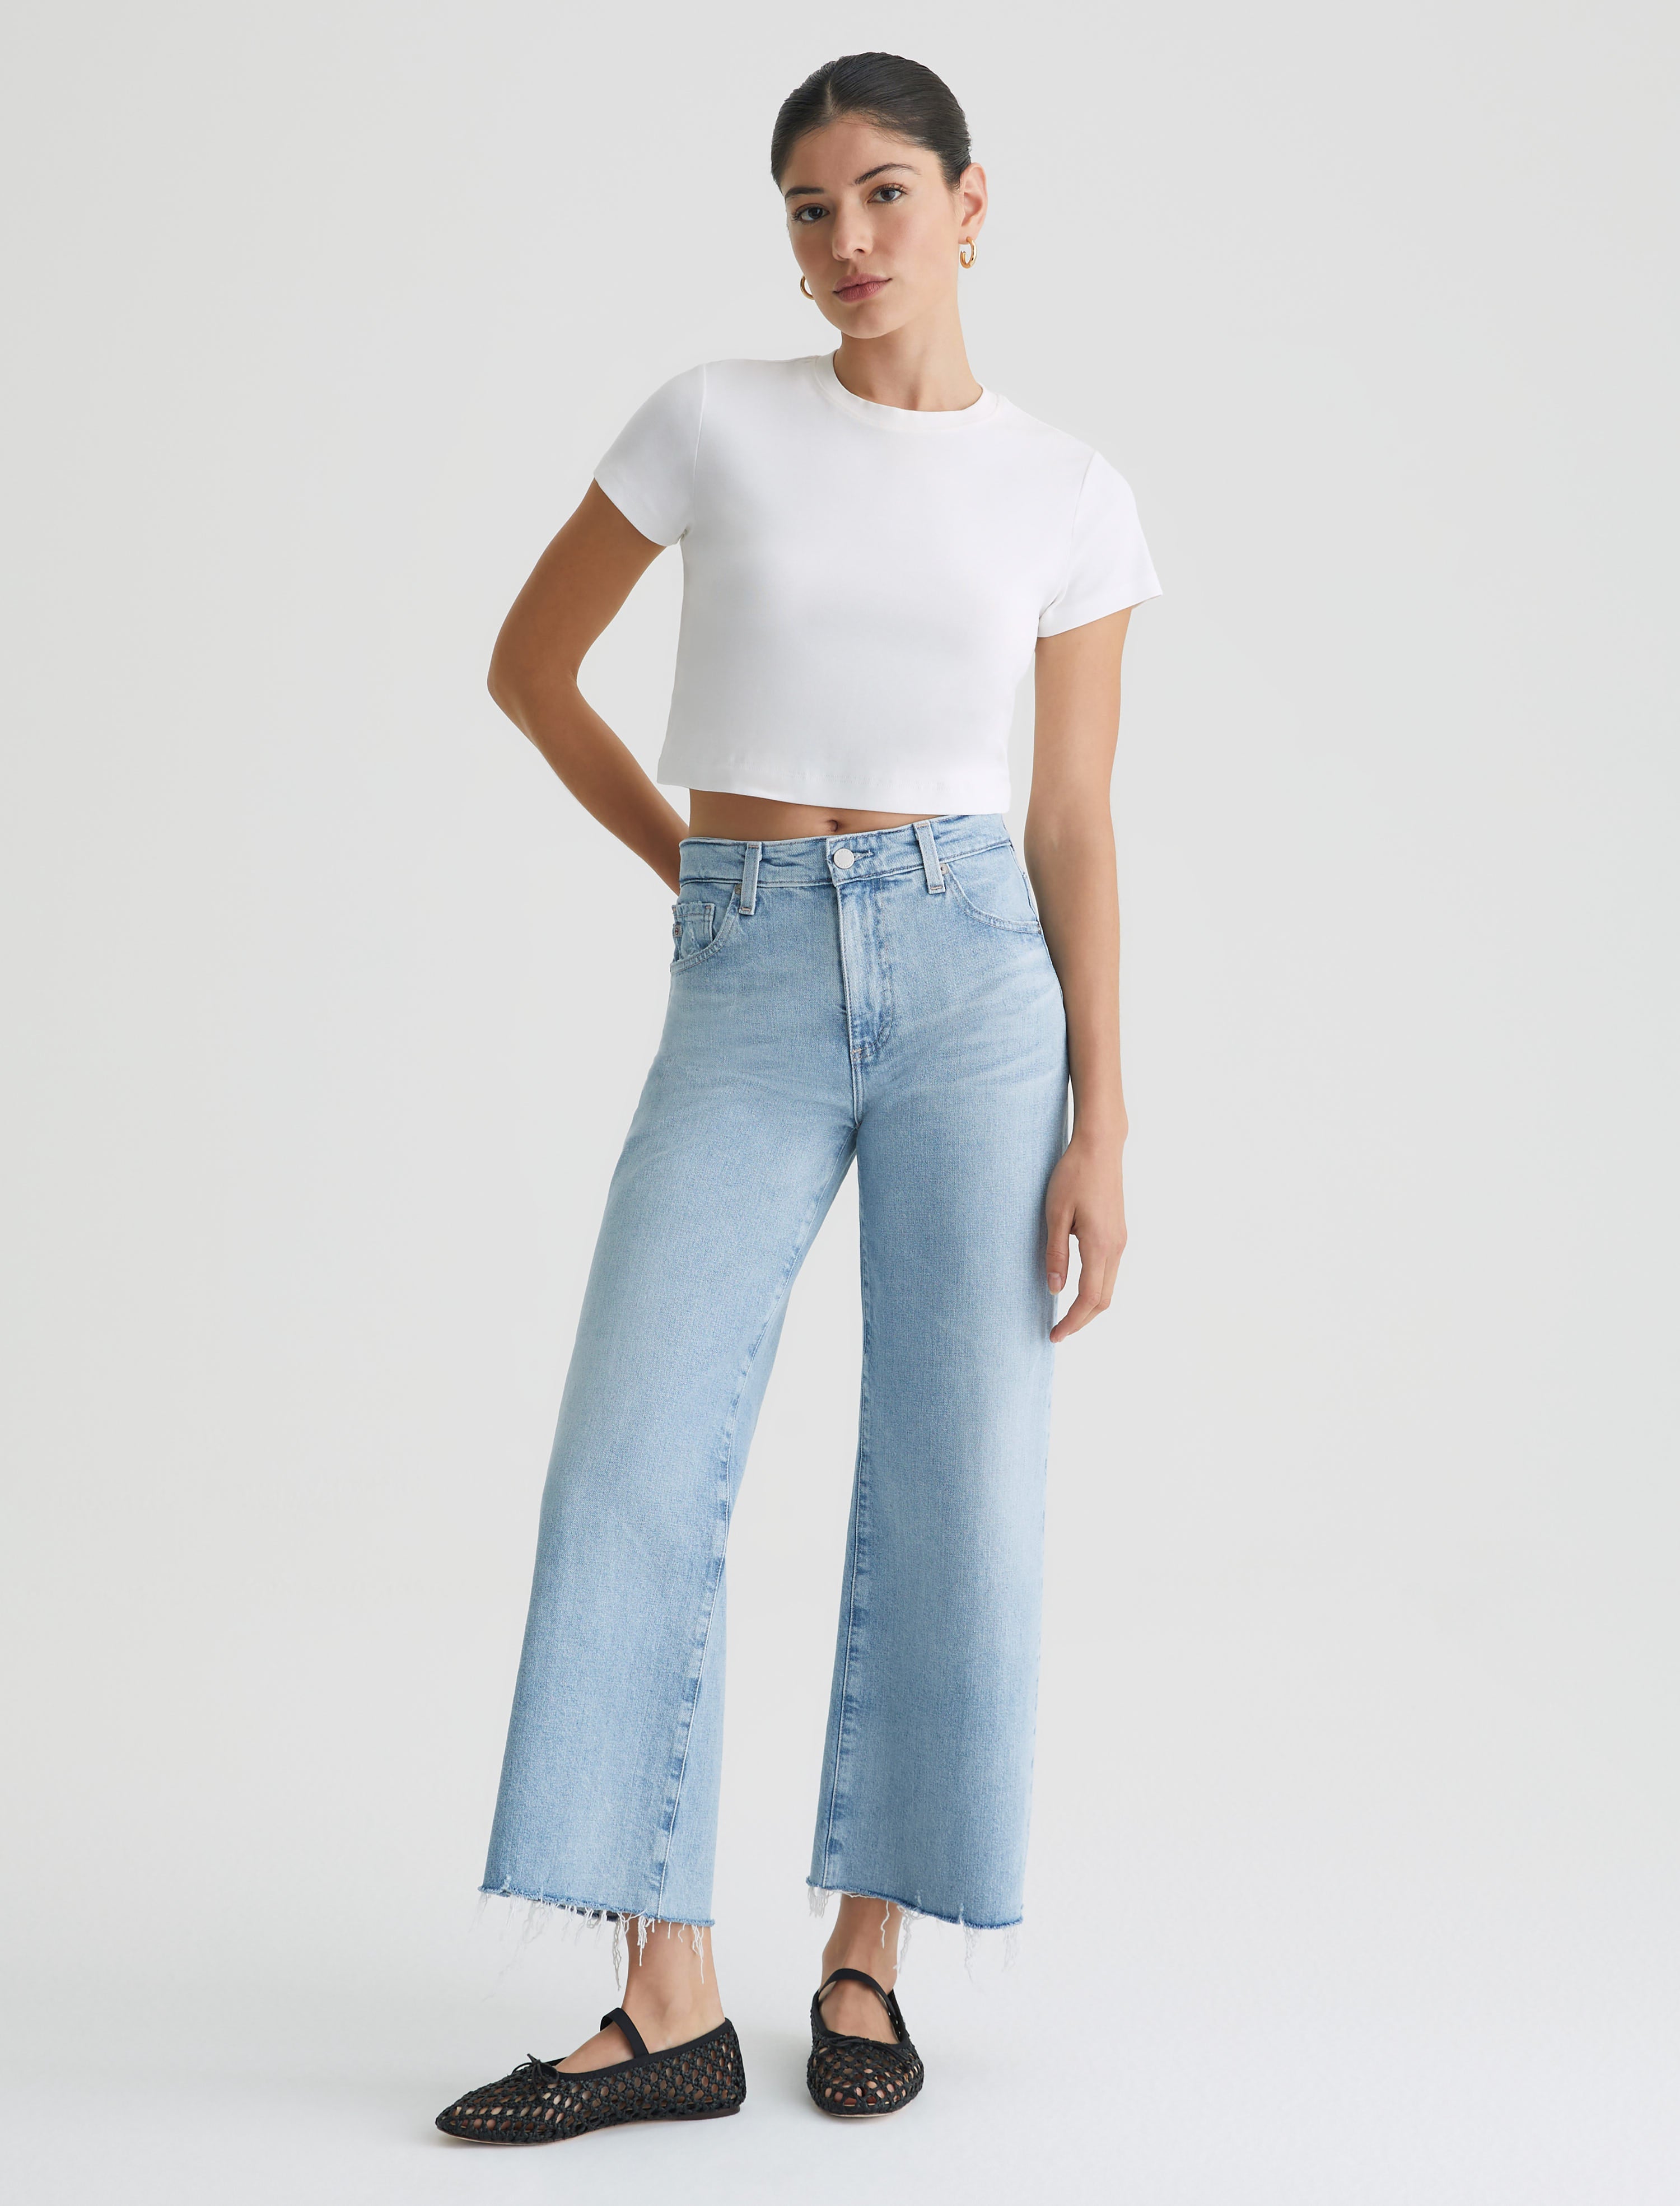 Jeans at Injeanius | Designer Brands to Elevate Your Every Day 